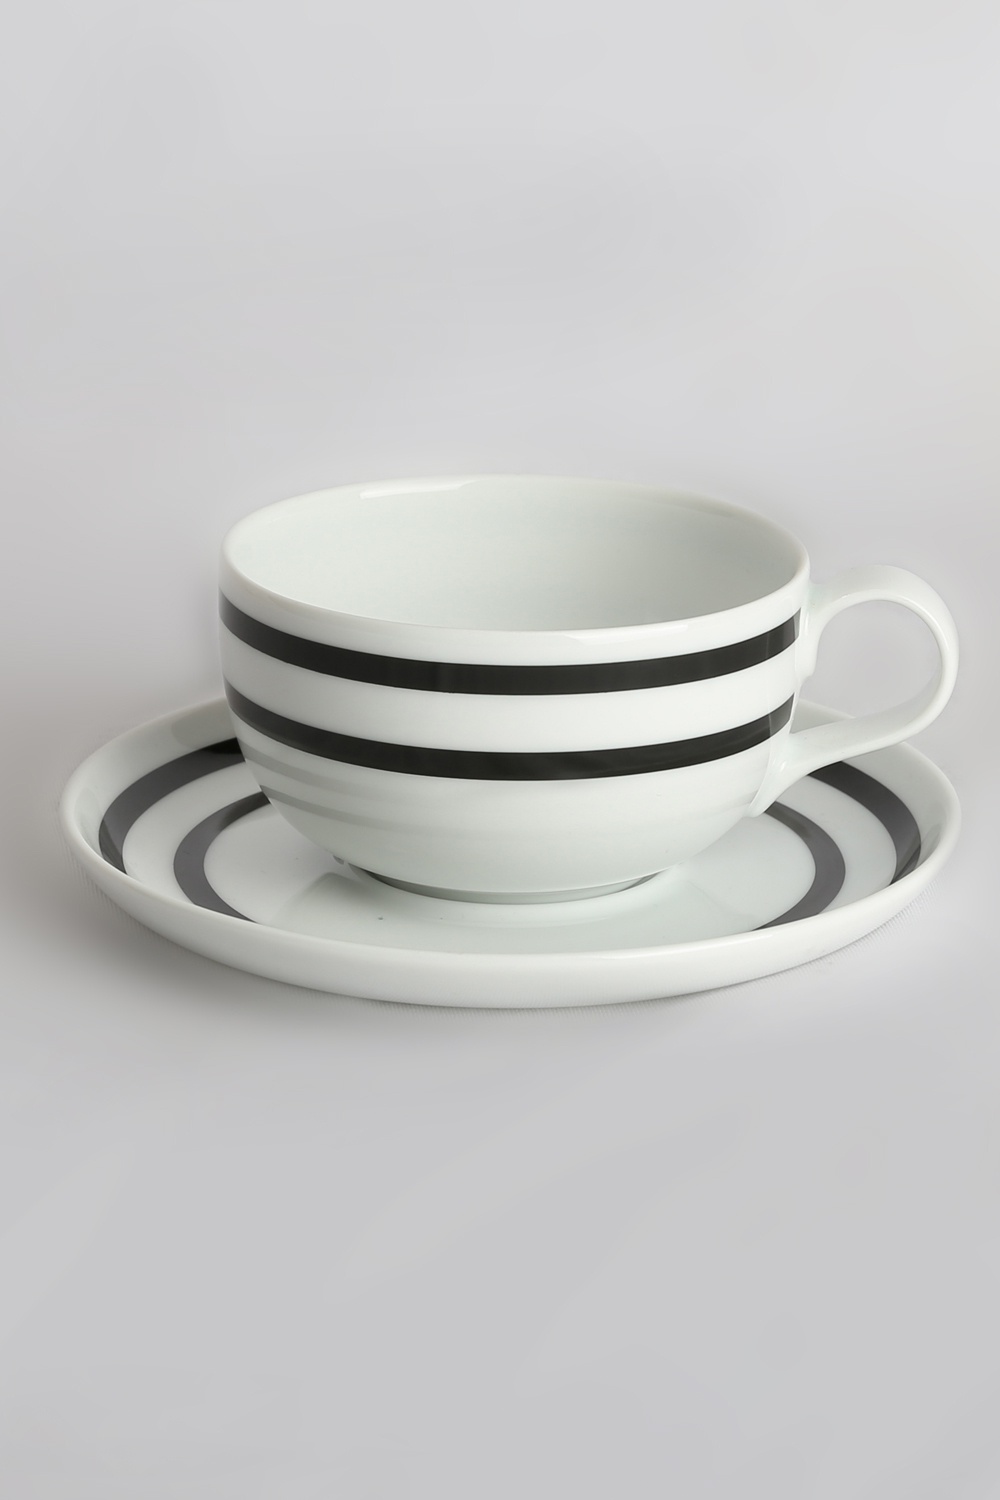 Odel Tea Cup And Saucer Ceramic Black Lines On White Base